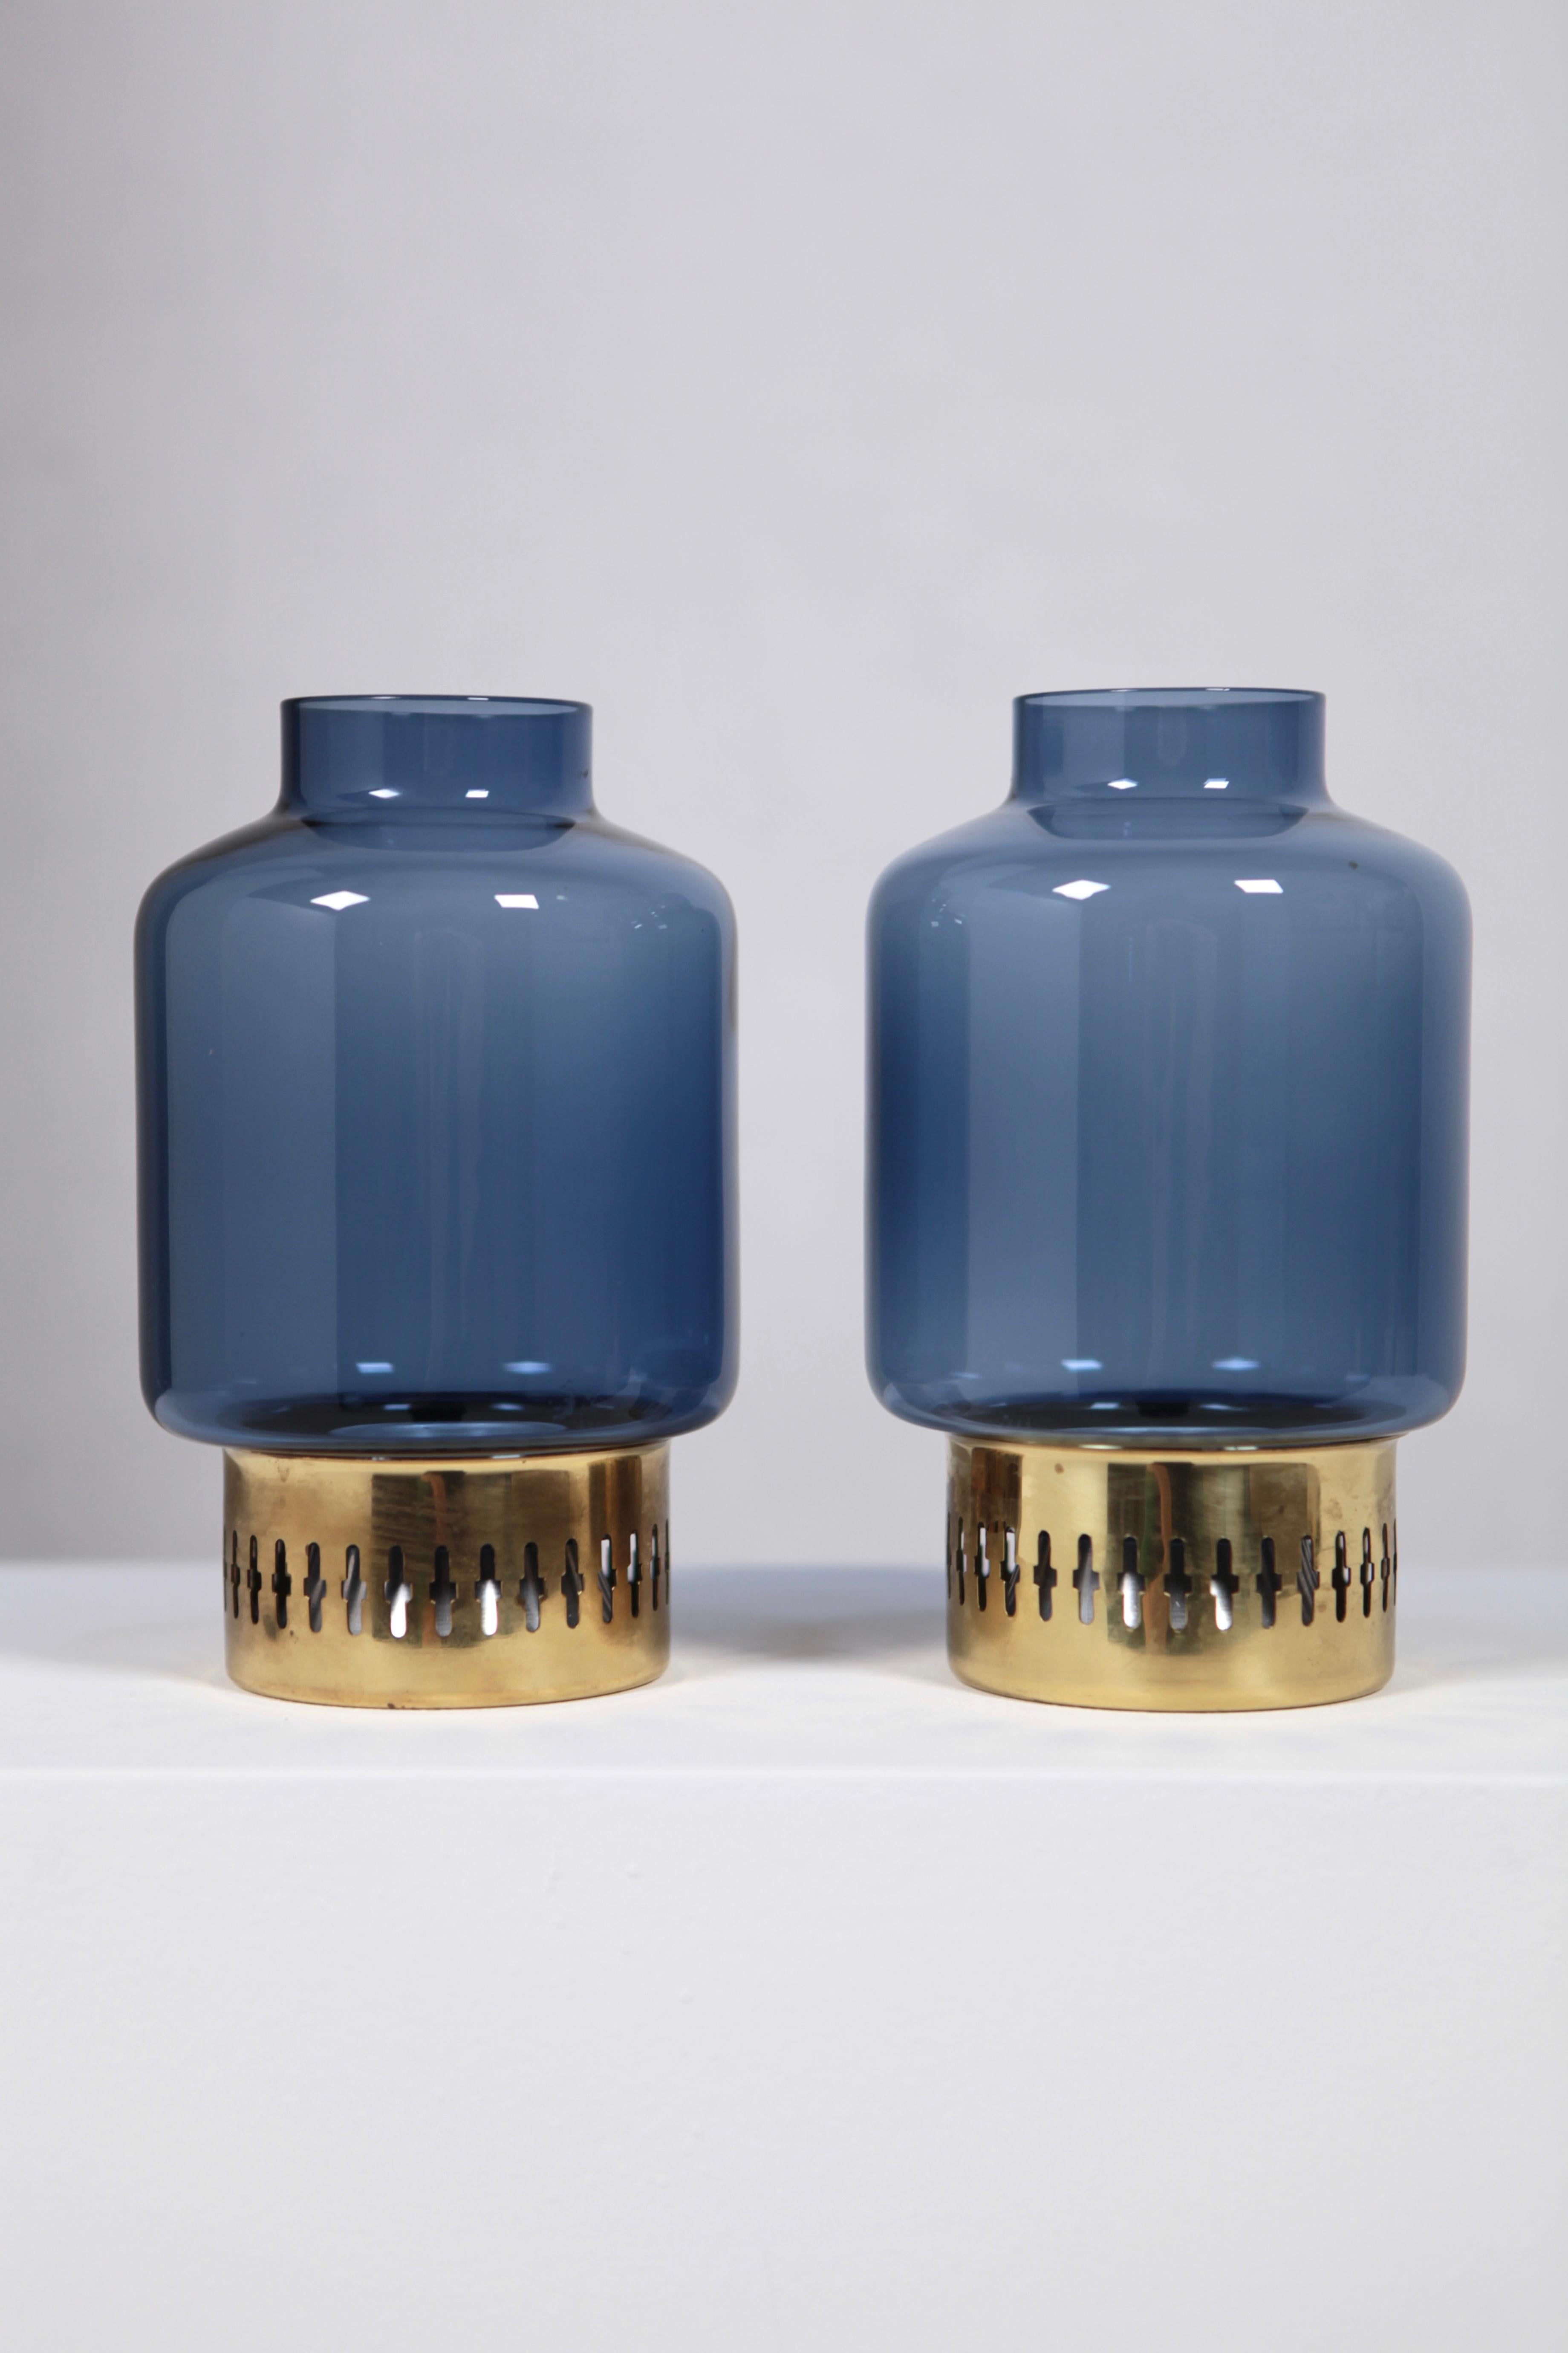 A nice set of 2 brass and colored blue glass candleholder by Hans-Agne Jakobsson, Sweden, 1950s. Great condition, no chips to the glasses, no dents to the brass. Signed to the underside.